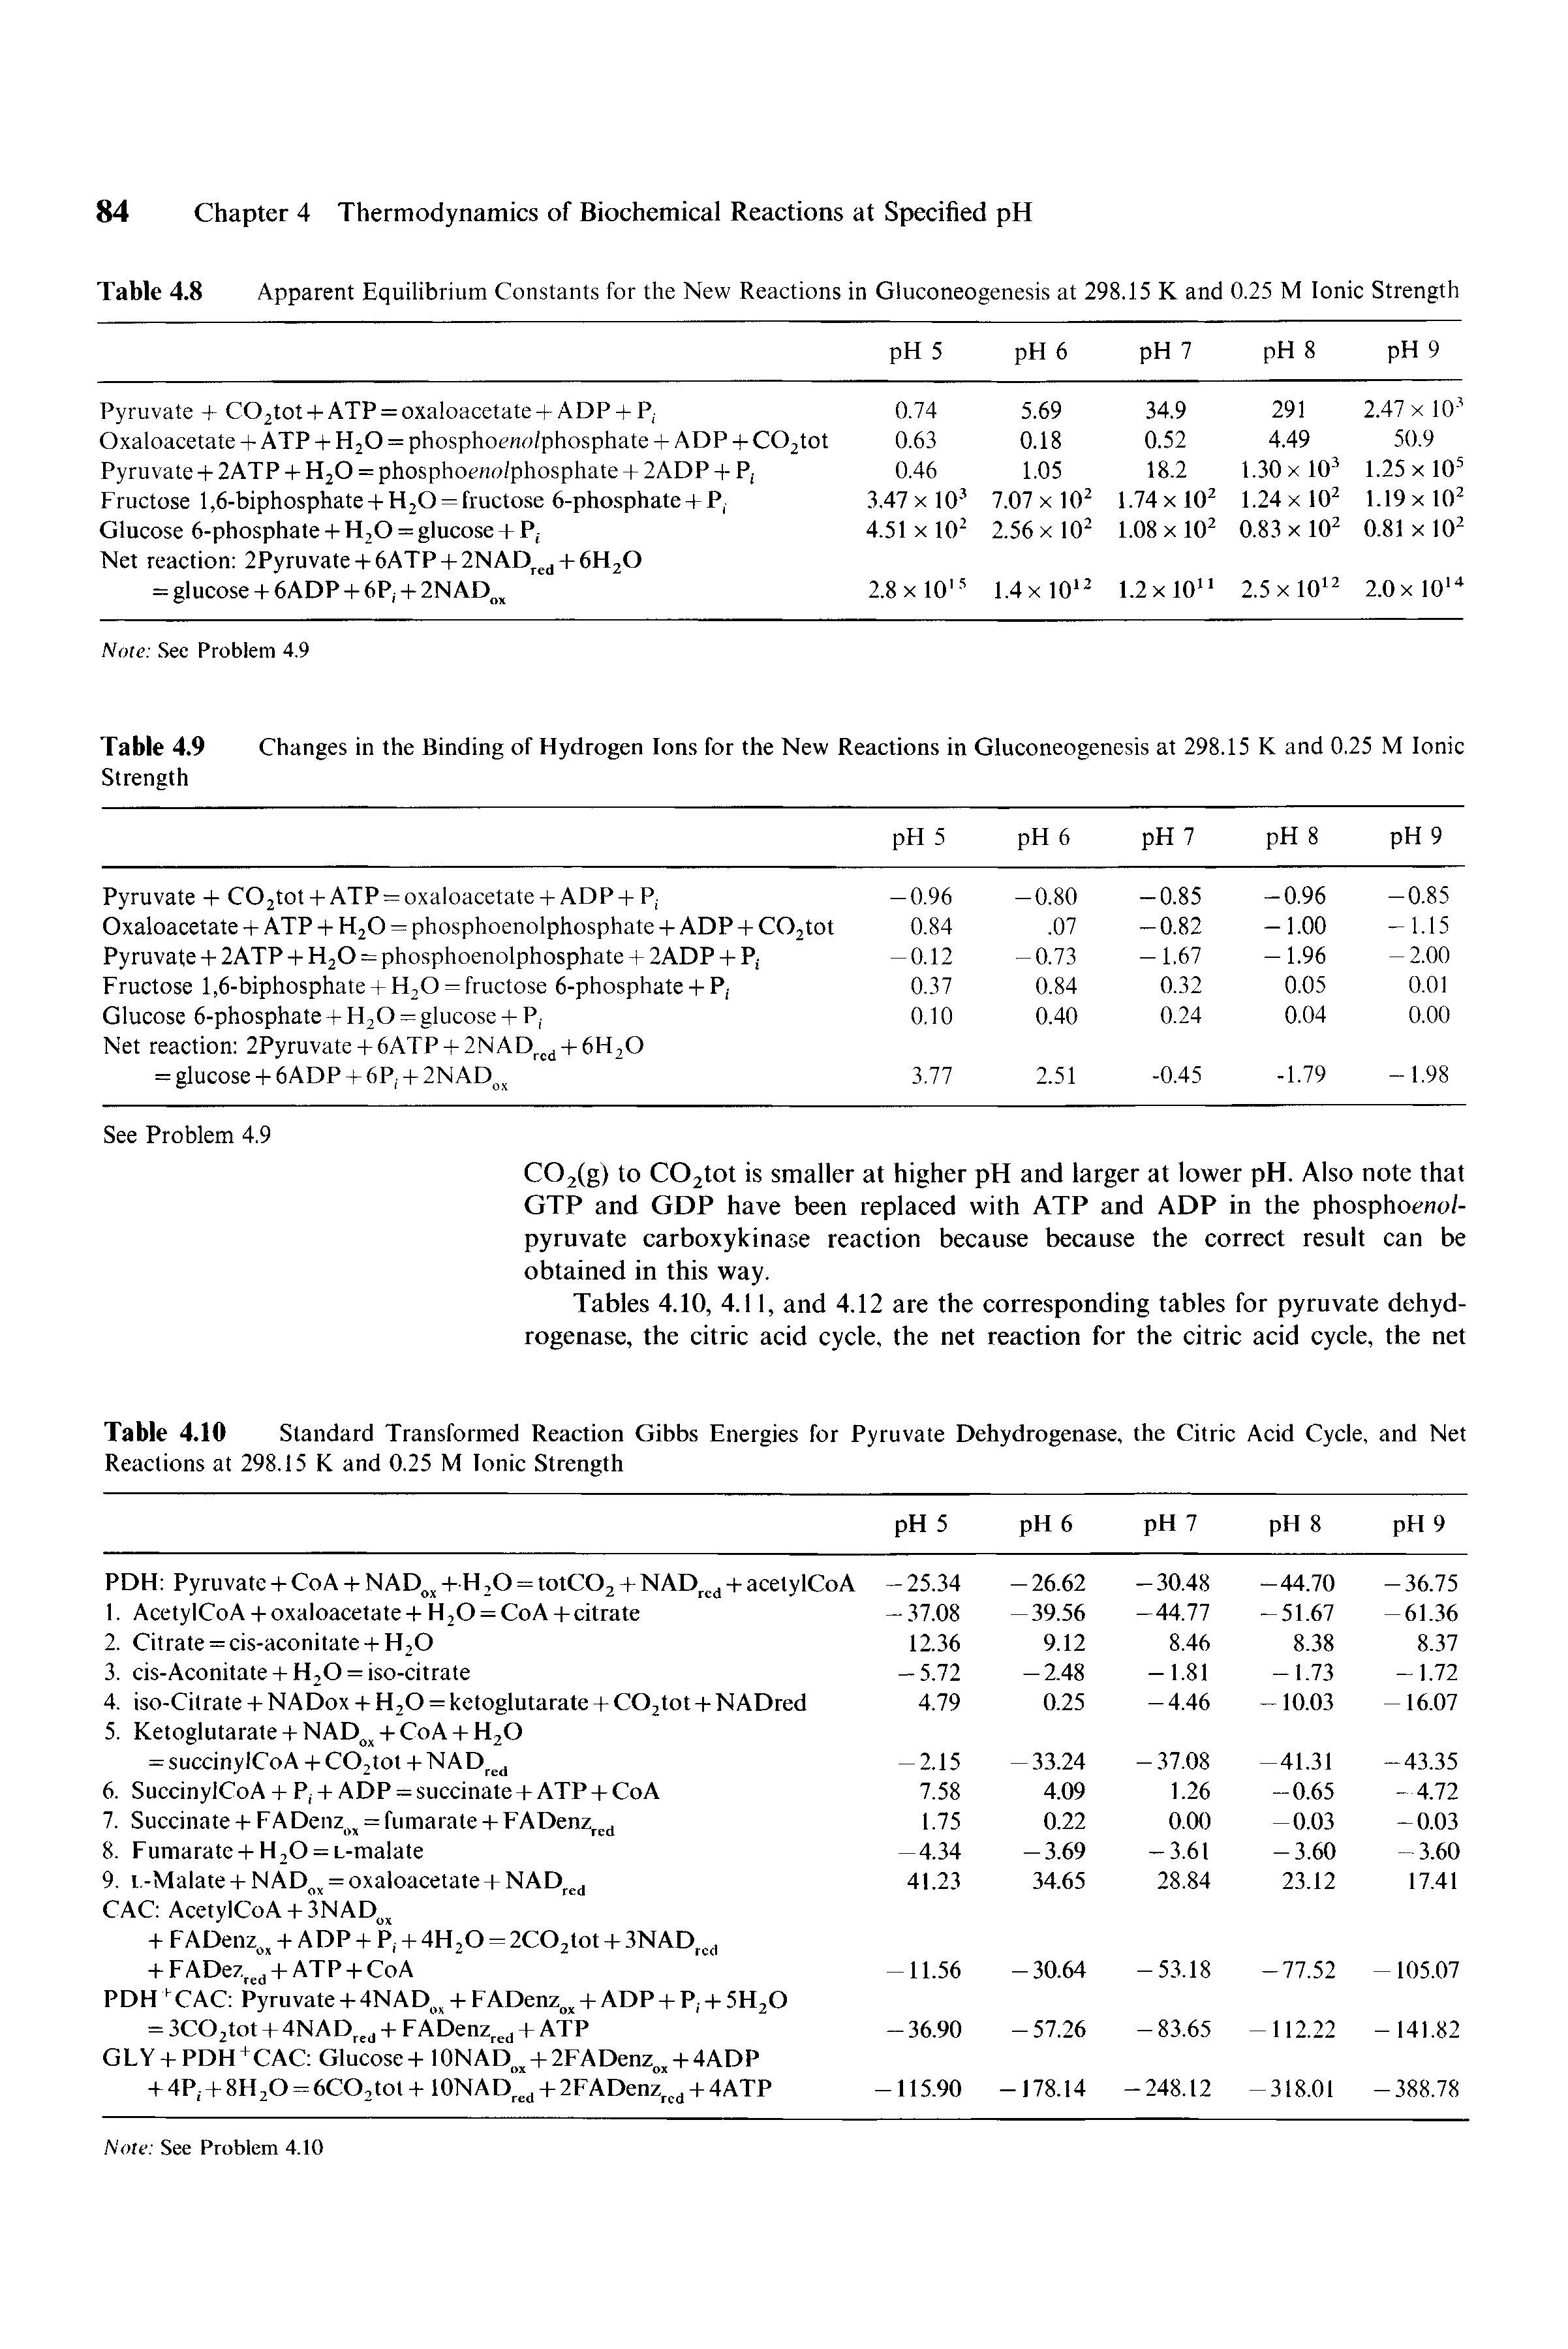 Table 4.10 Standard Transformed Reaction Gibbs Energies for Pyruvate Dehydrogenase, the Citric Acid Cycle, and Net Reactions at 298.15 K and 0.25 M Ionic Strength...